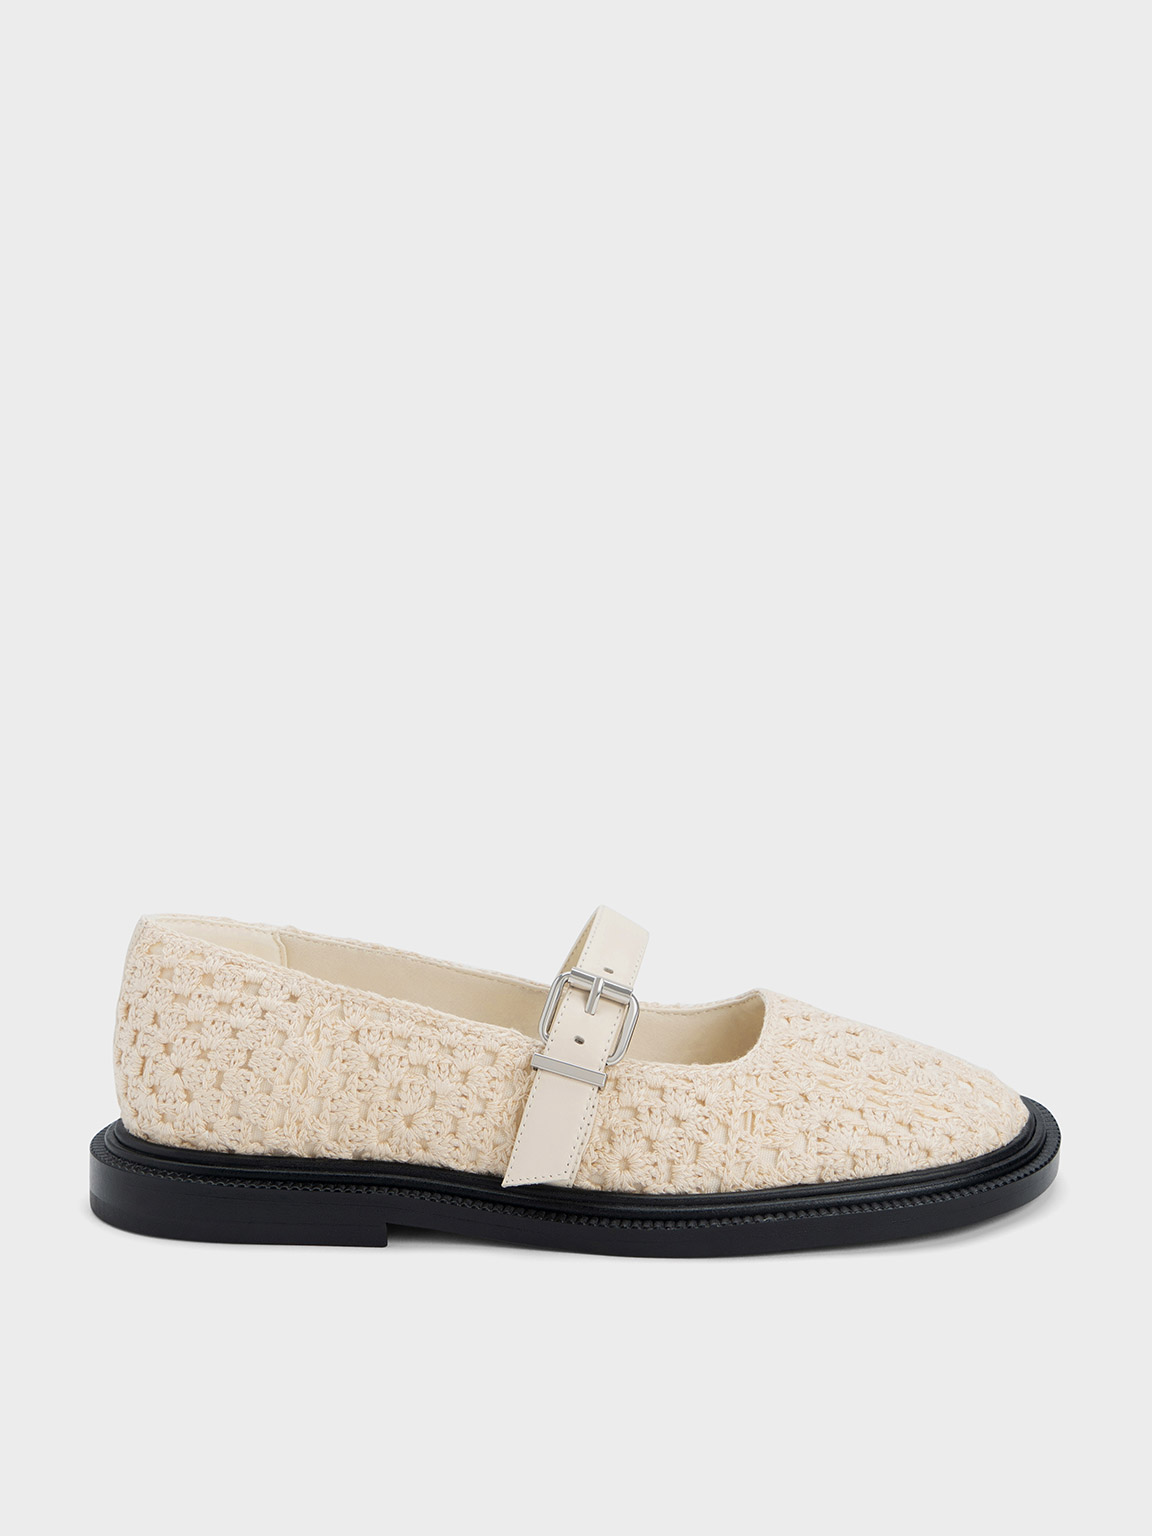 Crochet & Leather Mary Janes